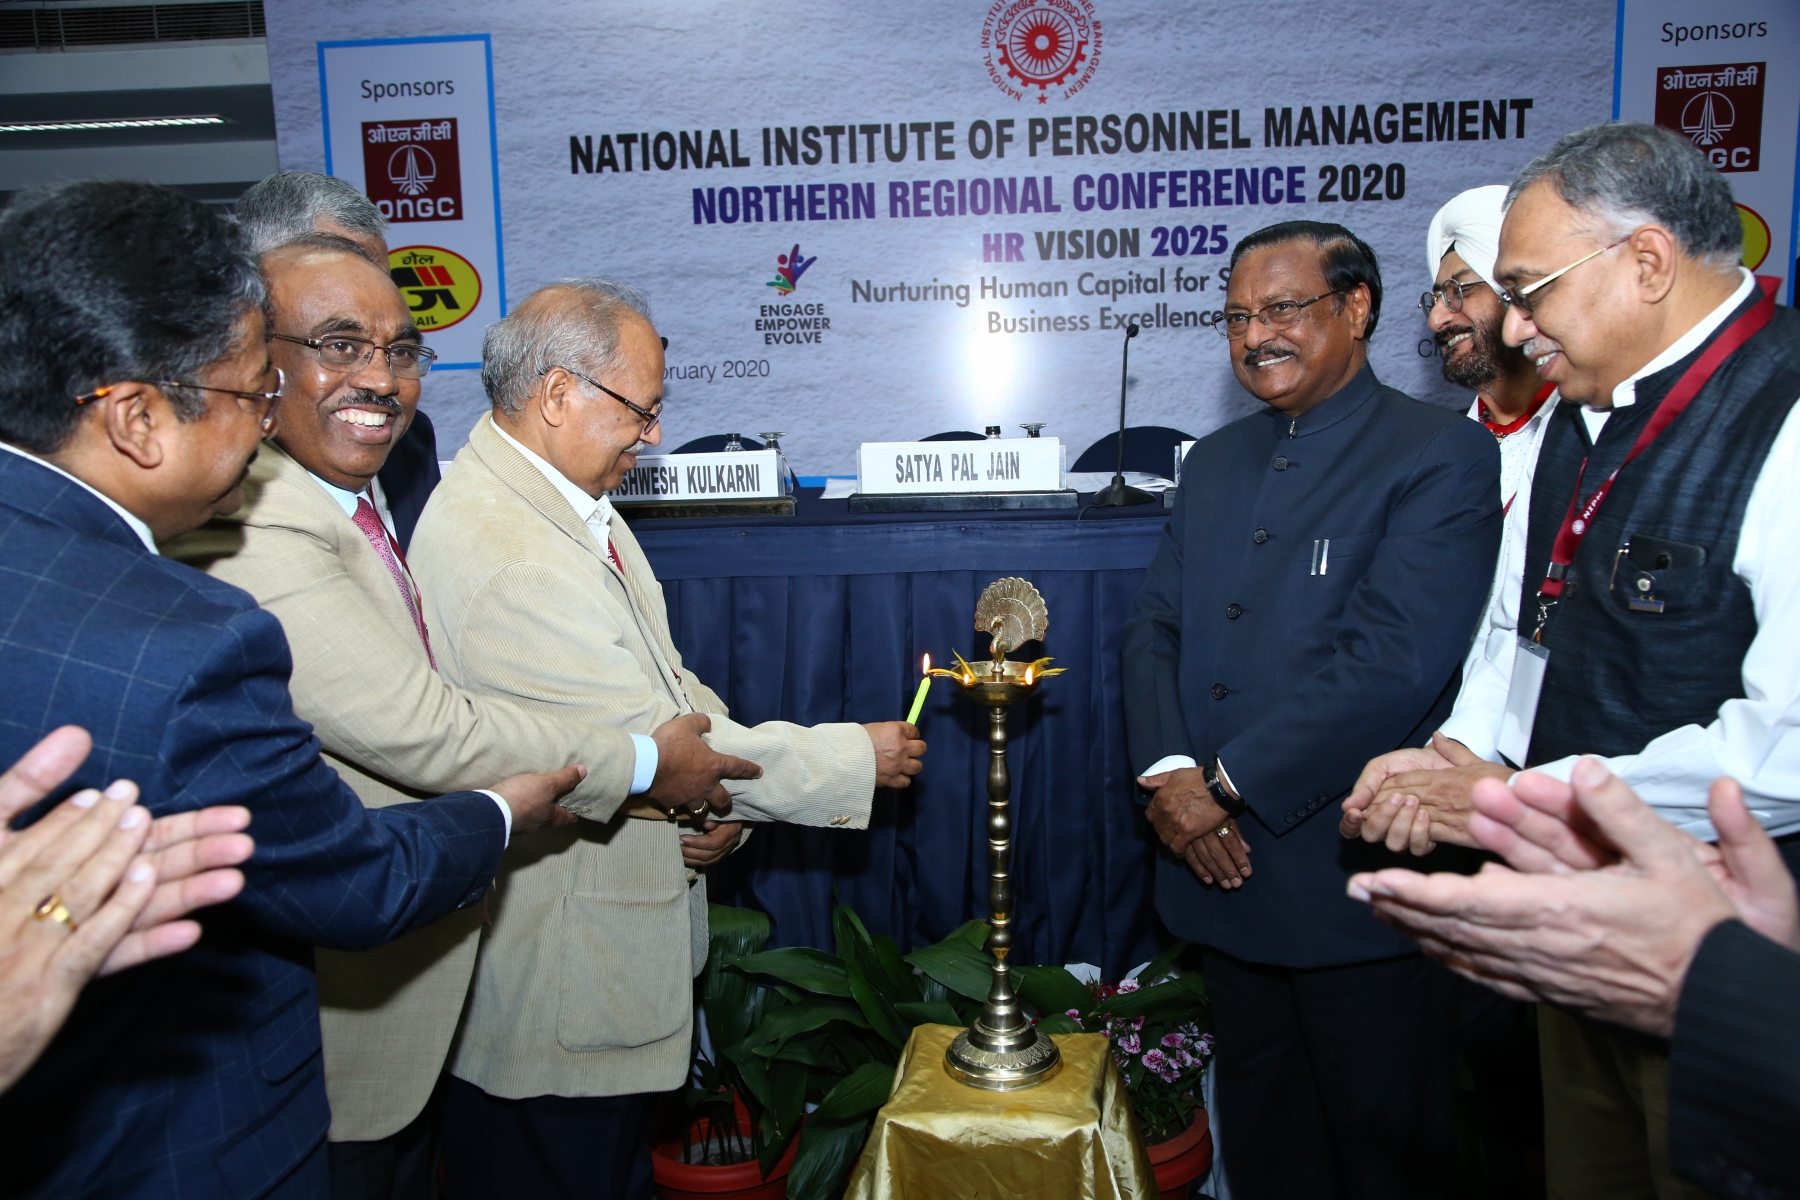 Northern Regional Conference Hosted By Punjab Chapter From 28th 29th February 2020 In Chandigarh